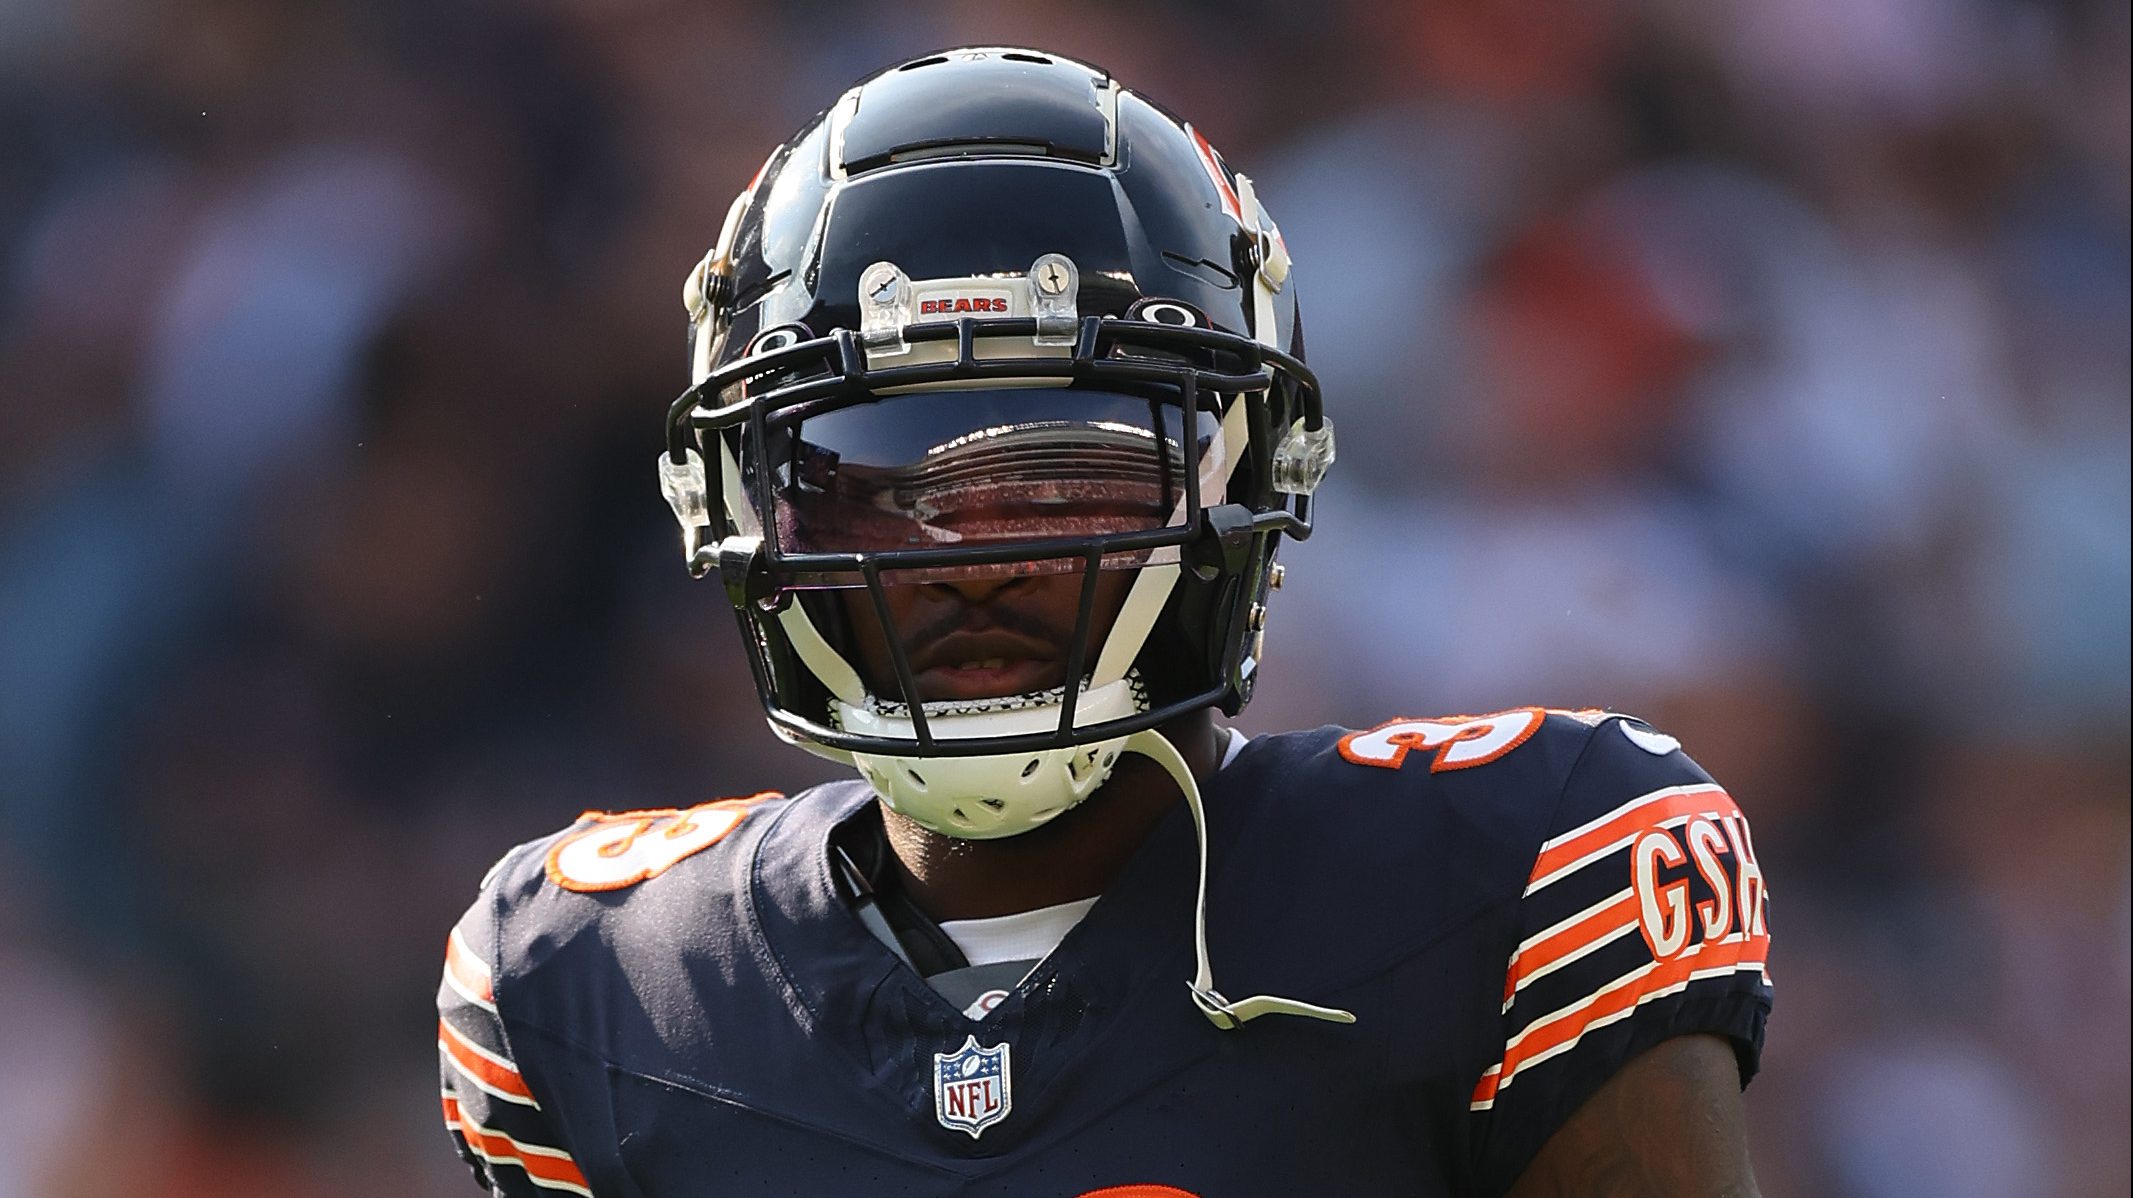 NFL trade deadline: Bears players who could be dealt